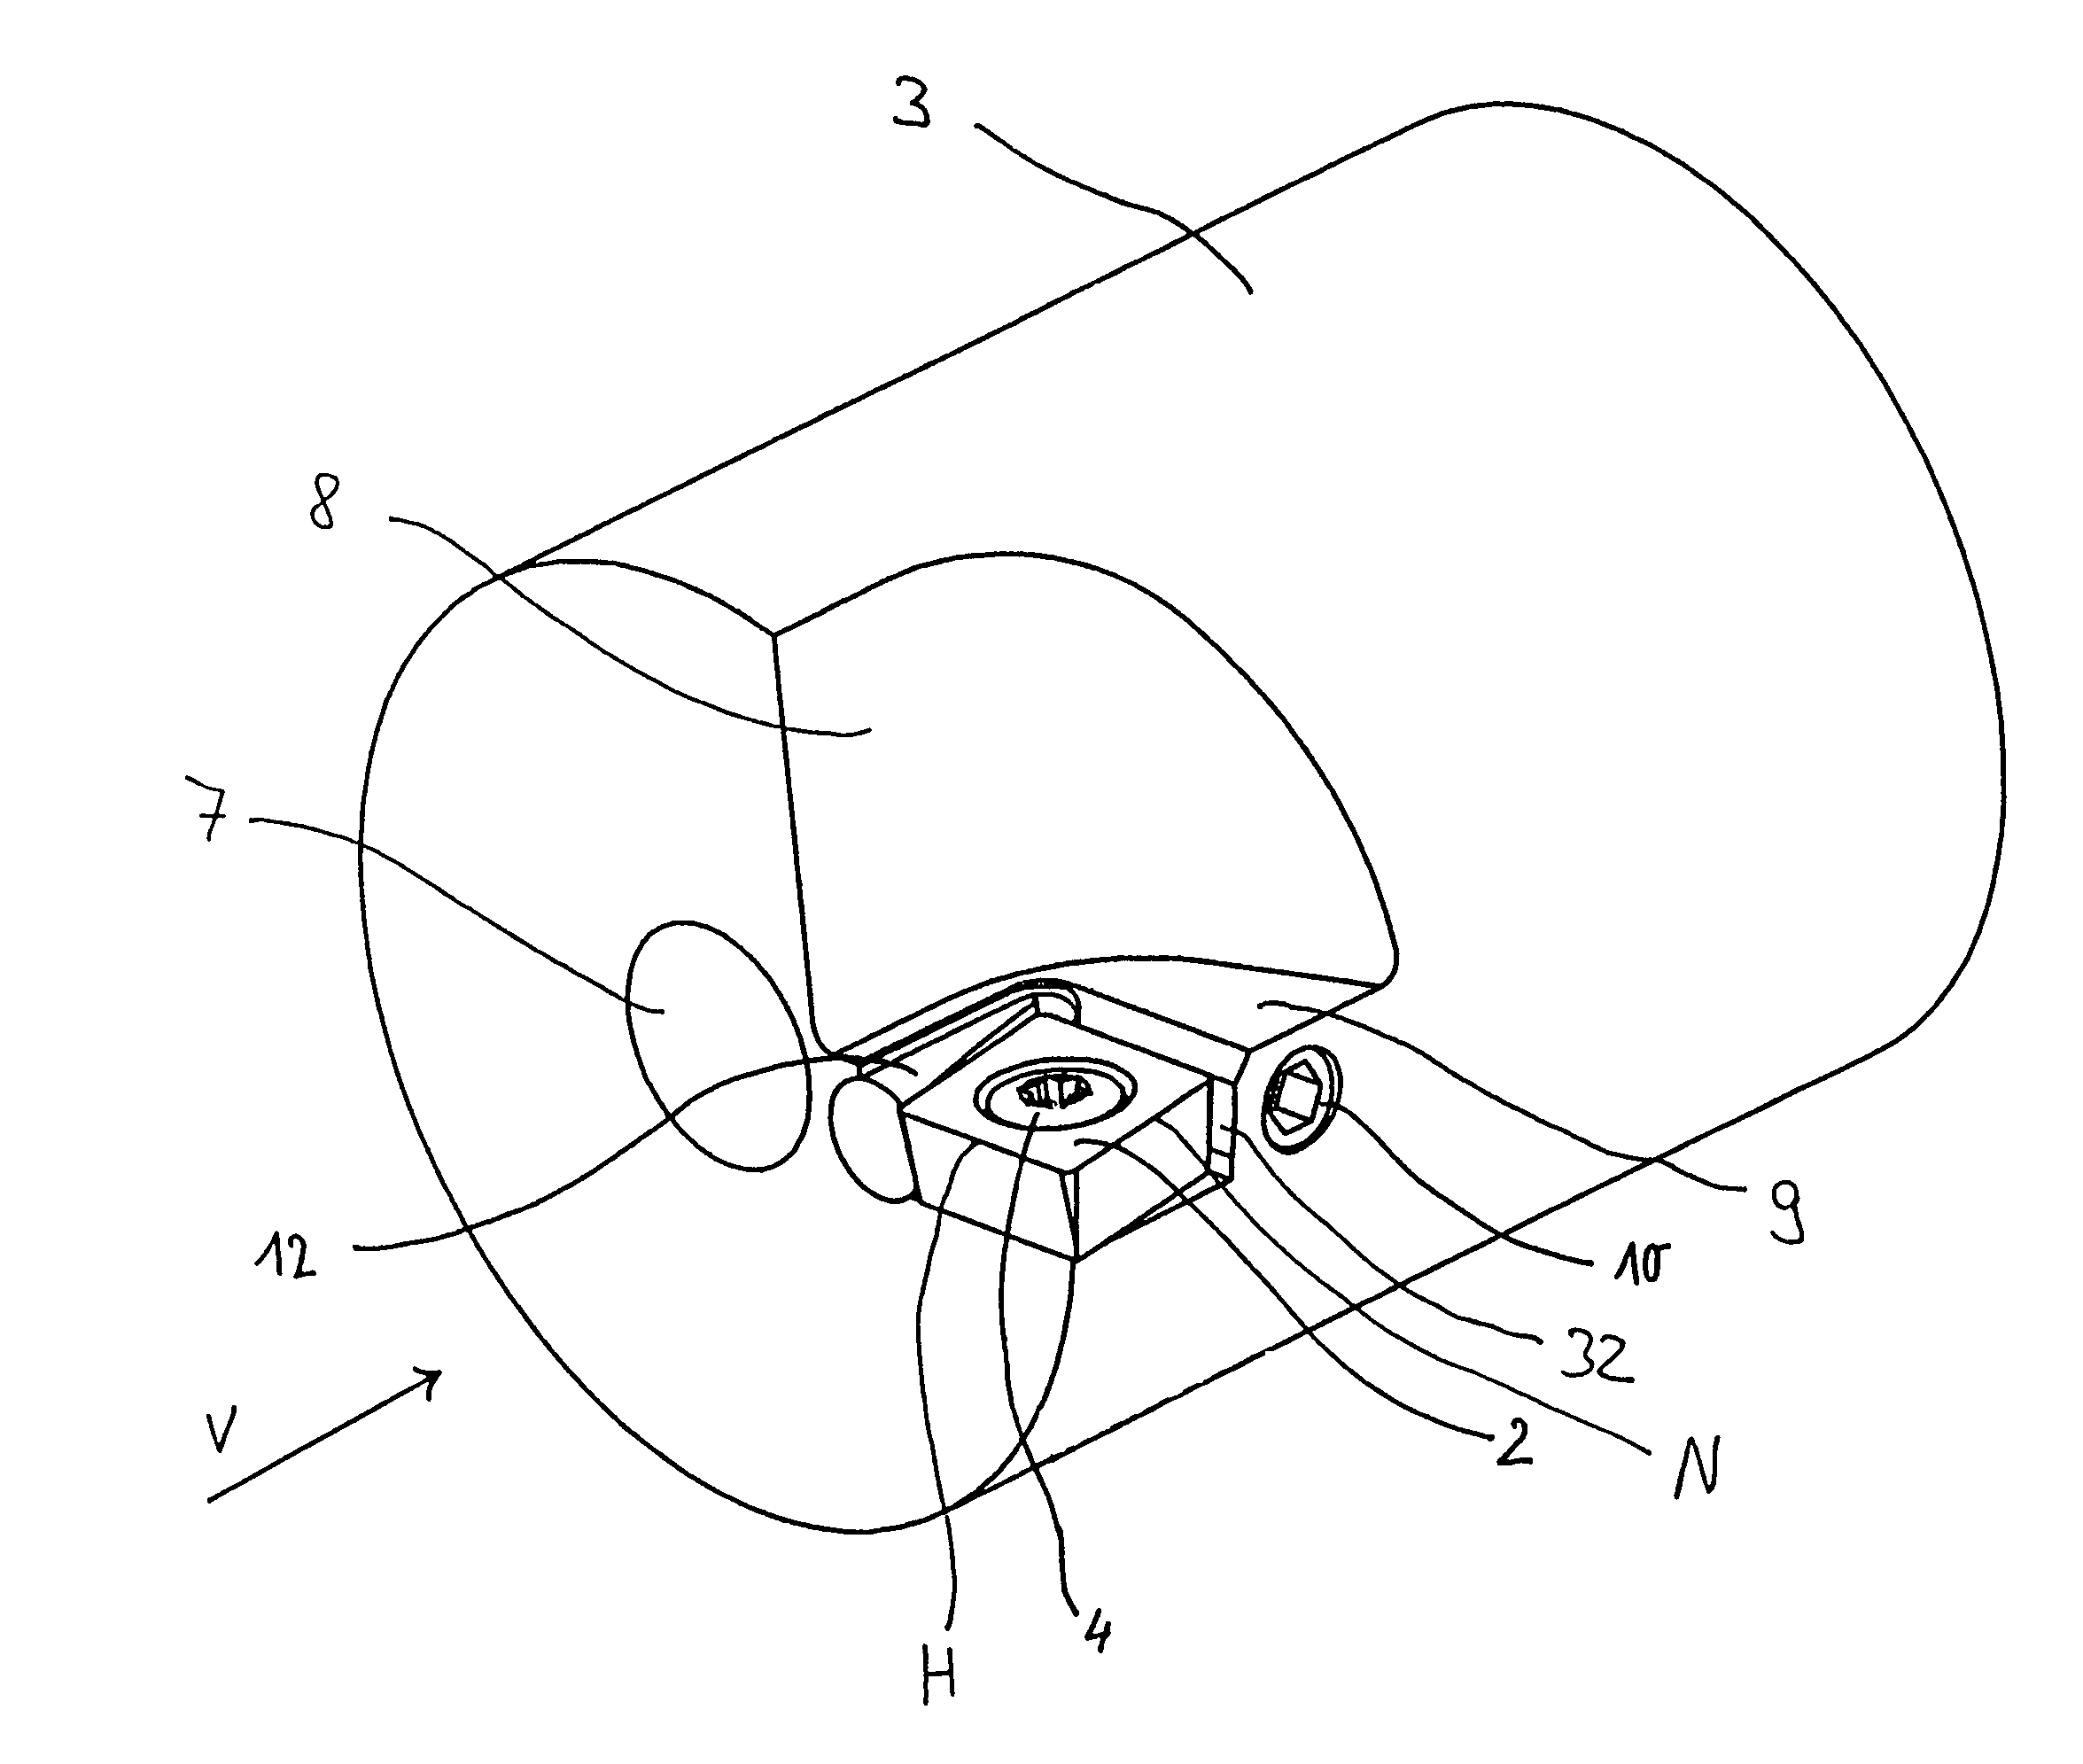 Clamping and adjustment apparatus for a cutting tool